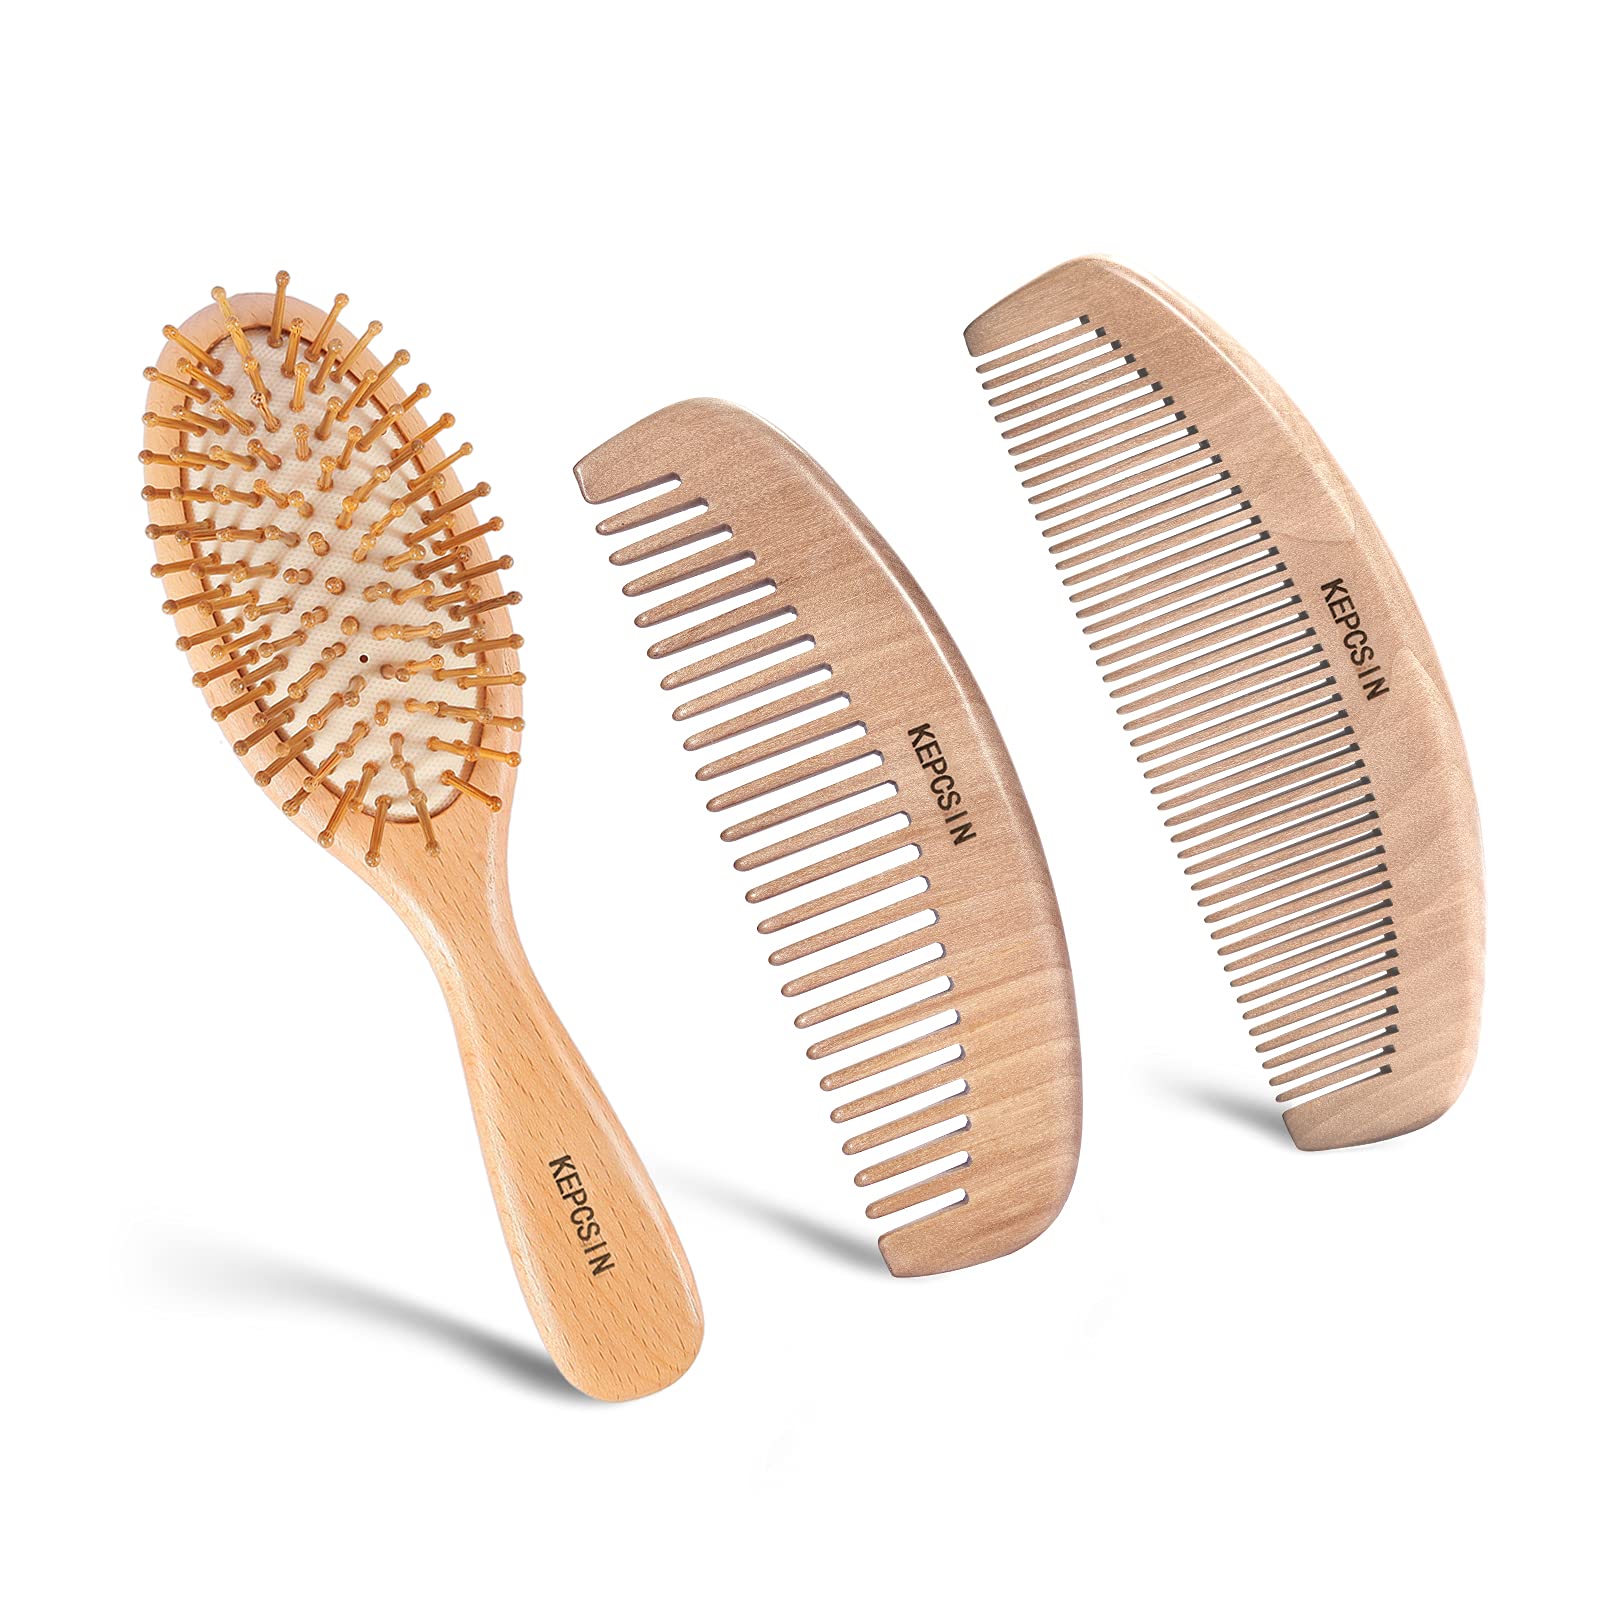 Buy COOLBABY Hair Comb Natural Wooden Paddle Hair Brush With Air Cushion  Combs For Scalp Massage Anti-static No Hair Tangle Comb Online Shop On  Carrefour UAE | Wood Hair Brush Comb Bamboo